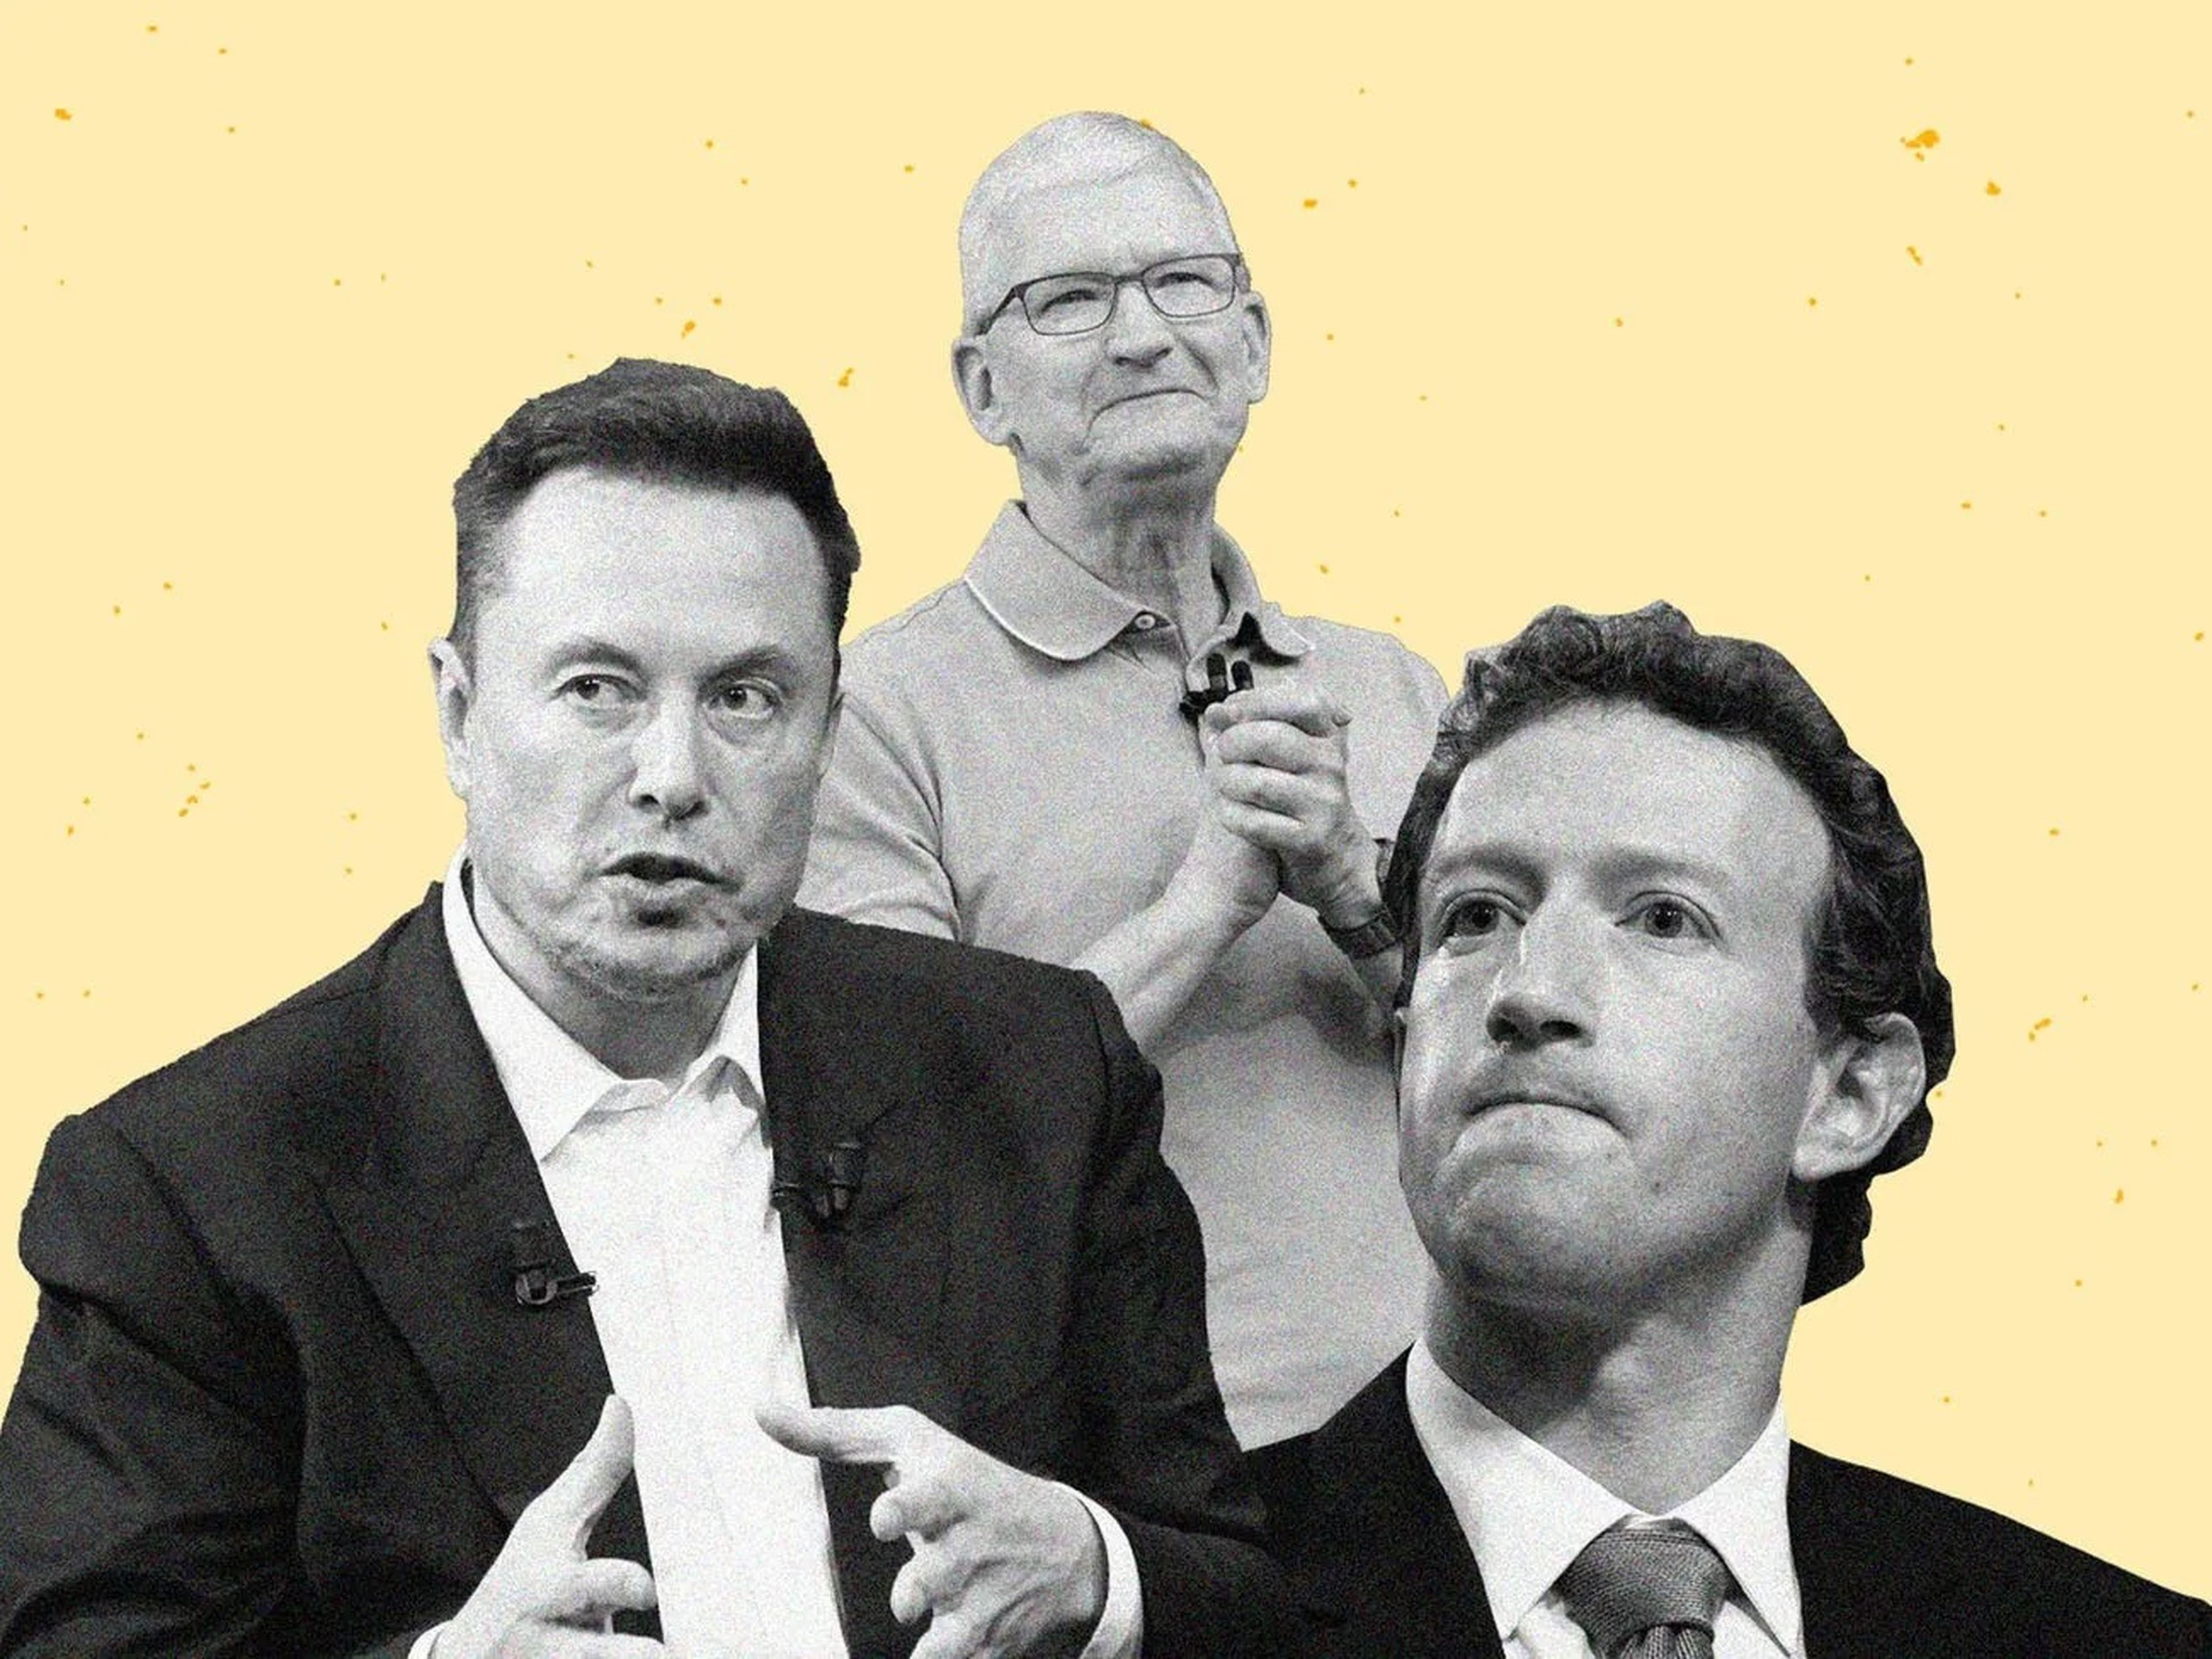 Mark Zuckerberg, Elon Musk, and Tim Cook against a yellow background.